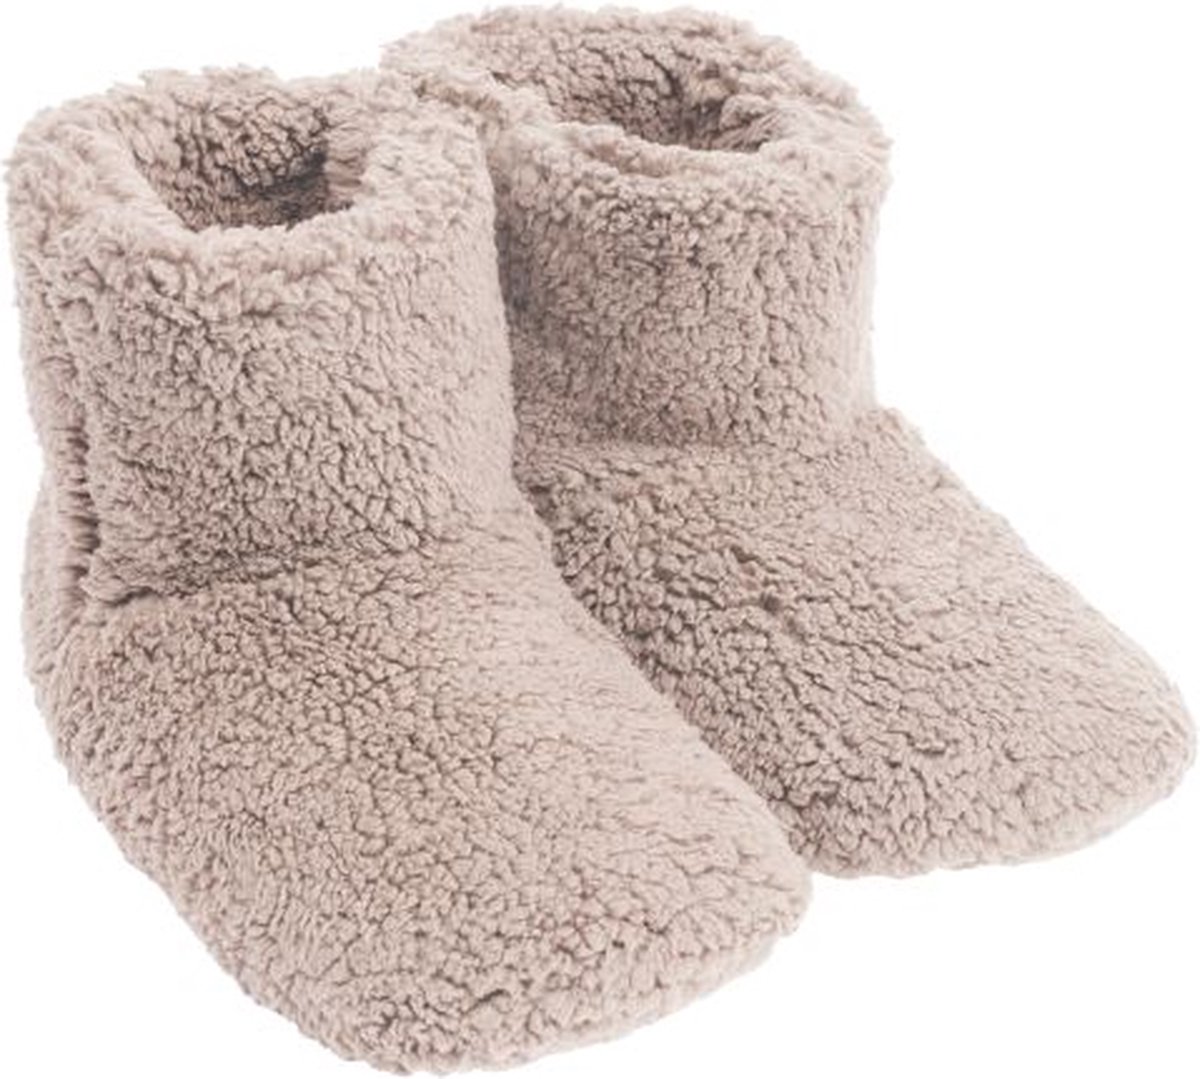 Mistral Home - Pantoffels boots teddy - maat 38/39 - 100% polyester - Beige